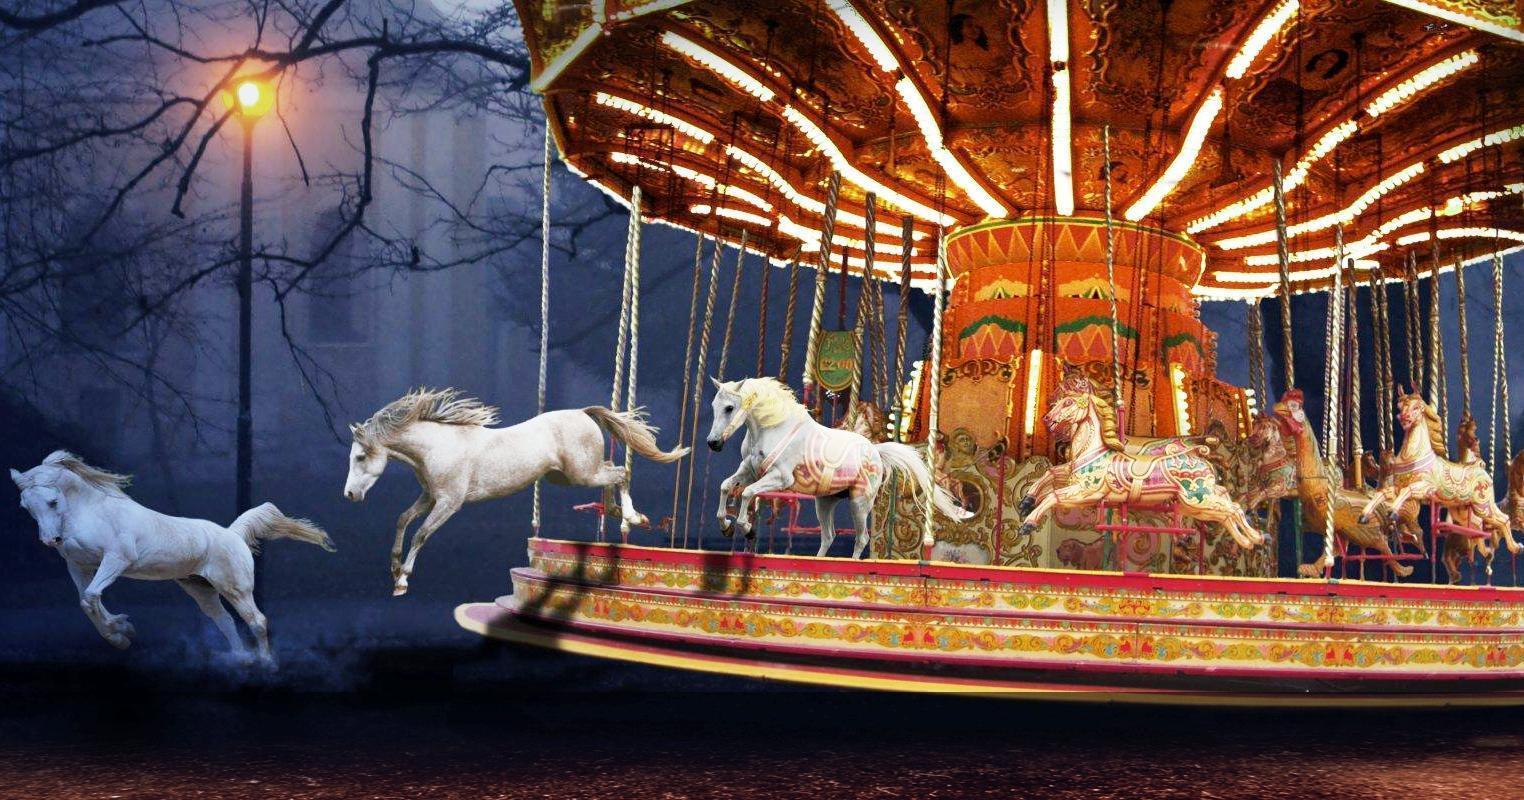 life-is-like-a-big-merry-go-round